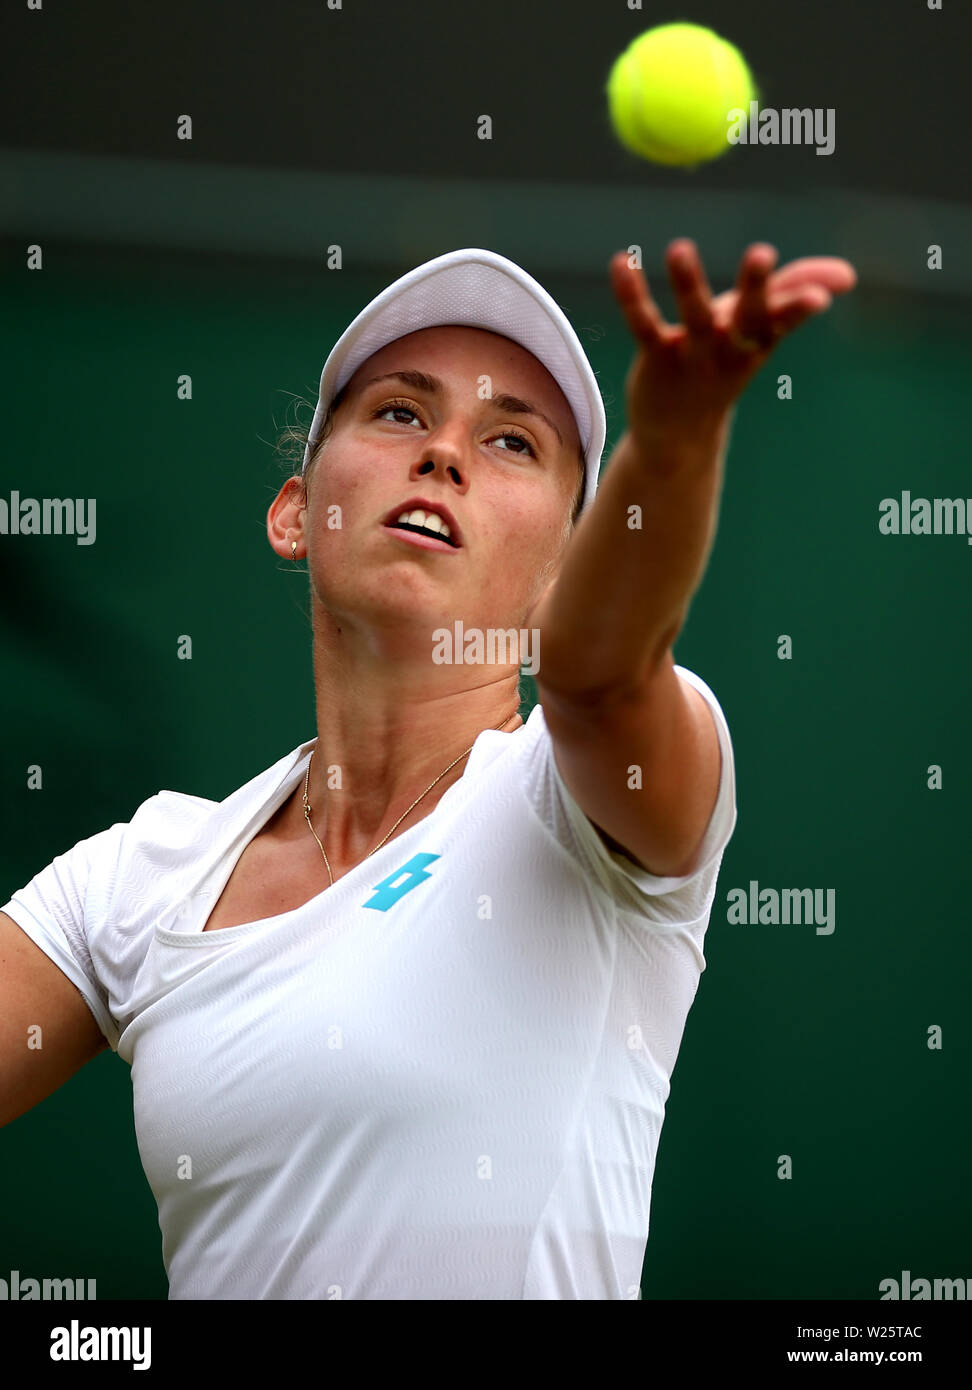 Elise Mertens in action against Qiang Wang on day six of the Wimbledon Championships at the All England Lawn Tennis and Croquet Club, Wimbledon. Stock Photo